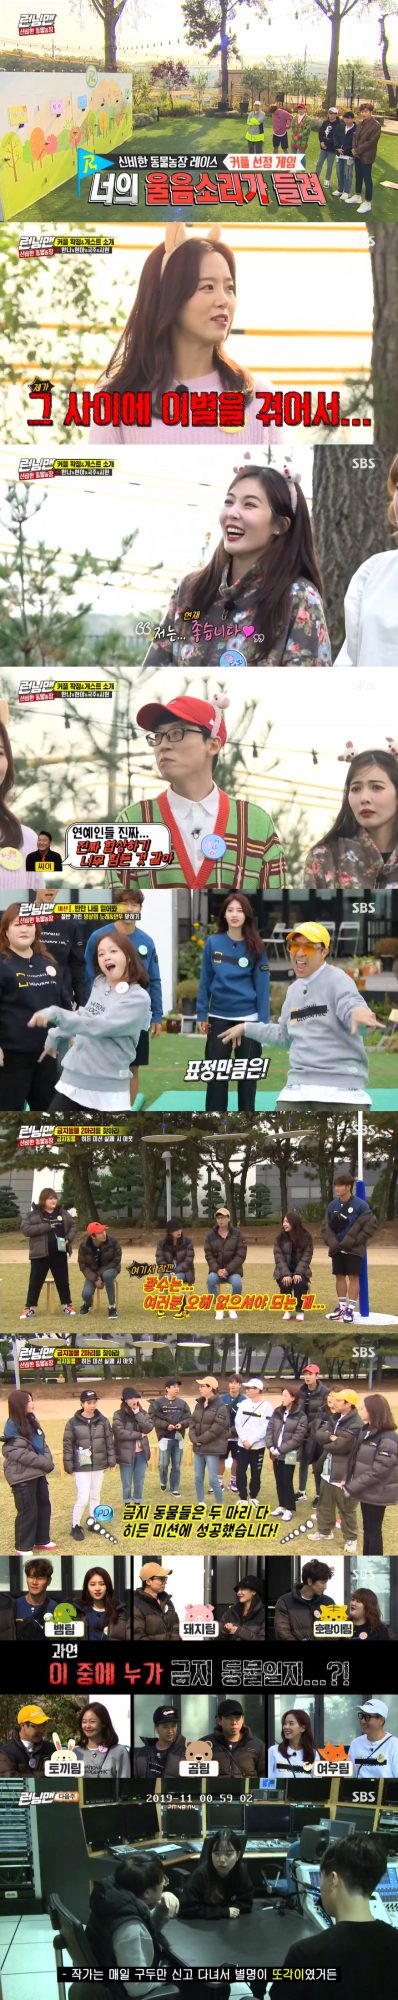 On SBS Running Man, singer Hyuna, actor Kang Han-Na, gag woman Lee Guk-joo, and group Evergloo showed off their candid and hairy charm.Song Ji-hyo and Yang Se-chan were suspected of playing a hole in the game, but they were found to have been an alienable charm, drawing laughter from the members.On the 10th, Running Man featured Hyuna, Kang Han-Na, Lee Guk-joo and Sihyun as guests. On this day, Race was decorated with Mysterious Animal Farm.Its a race to find two banned animals disguised as ordinary animals; the banned animal had to perform the Hidden mission before the final race.Fox teams Kang Han-Na and Ji Suk-jin, rabbit teams Jeon So-min and Haha, pig teams Hyona and Yoo Jae-Suk, tiger teams Lee Guk-joo and Lee Kwang-soo, snake teams Sihyun and Kim Jong-kook, bear teams Song Ji-hyo and Yang Se-chan He spread the game.Yoo Jae-Suk asked Kang Han-Na, Did you not actively perform dramas, entertainments, etc.Im not very active right now, Kang Han-Na said. Im resting at home. Im lying too much and Im trying to buy a cervical pillow.Kang Han-Na once said in an interview in the past that he wanted to marry at the age of thirty-two.When Yoo Jae-Suk asked if it was going well, Kang Han-Na said, It was only a year after Running Man last year, and I had a breakup in the meantime.Haha said, Im going to meet my last love. So, Jeon So-min said, I think I met one more person and then the next person.Kang Han-Na said, I have been through it for a while, but Yoo Jae-Suk actively said that he would tell me how to overcome the breakup.Kim Jong-kook said, As soon as I broke up, I took the apartment stairs.When Shihyun said, I am going on a trip, Kim Jong-kook said, Can I talk about it? So Sihyun was embarrassed and laughed, saying, I did not travel.I like it, I havent thought about it, said Hyuna, who is in love with Dunn.Lee Guk-joo said, When you break up, you have to play like garbage. You have to go to Itaewon.The current representative of the agency of Hyona is singer PSY. Yoo Jae-Suk, who met a few days ago, said, Please do well to Hyona.I asked him to dance a lot, not to talk a lot, Yoo Jae-Suk told PSY, I also talk well.As president, it seems difficult to negotiate with celebrities, but Im an entertainer, but celebrities are really hard to talk about, said Yoo Jae-Suk.I will work hard, Mr. President, Hyuna said.The first mission was to Trust me in half. It was a game that hit the title, singer, and choreography of a half-described music broadcast.Lee Guk-joo enjoyed the mood, embroiled in dancing regardless of Games win or loss.Sihyun, Jongguk, Jihyo and Sechan teams succeeded in getting hints in their first mission.On his way out to get a hint, Song Ji-hyos name tag was attached under Yang Se-chans shoes, so the members were suspicious of Yang Se-chan.The hint the two teams got was that banned animals live mainly in groups.The members moved to the next mission site, building a triangular poem in each others names; the members suspected a nervous Lee Kwang-soo.Yoo Jae-Suk laughed when he said, Gwangsu can not talk originally. It is a body gag.The second game was I hate it. Please answer me.If the production team says between the categories such as movies and food and likes and dislikes, the performers can answer that they are in the category of likes and that they do not fall in the category of likes.Members suspected Song Ji-hyo, Yang Se-chan and Lee Kwang-soo, who gave the wrong answer.However, the first round hint revealed that Song Ji-hyo and Yang Se-chan were regular animals; while the members were playing Game, the forbidden animals performed the Hidden mission.Next week, a mysterious animal farm race will be followed: The trailer shows the crew talking about ghost stories, raising questions about what this story might have to do with the race.